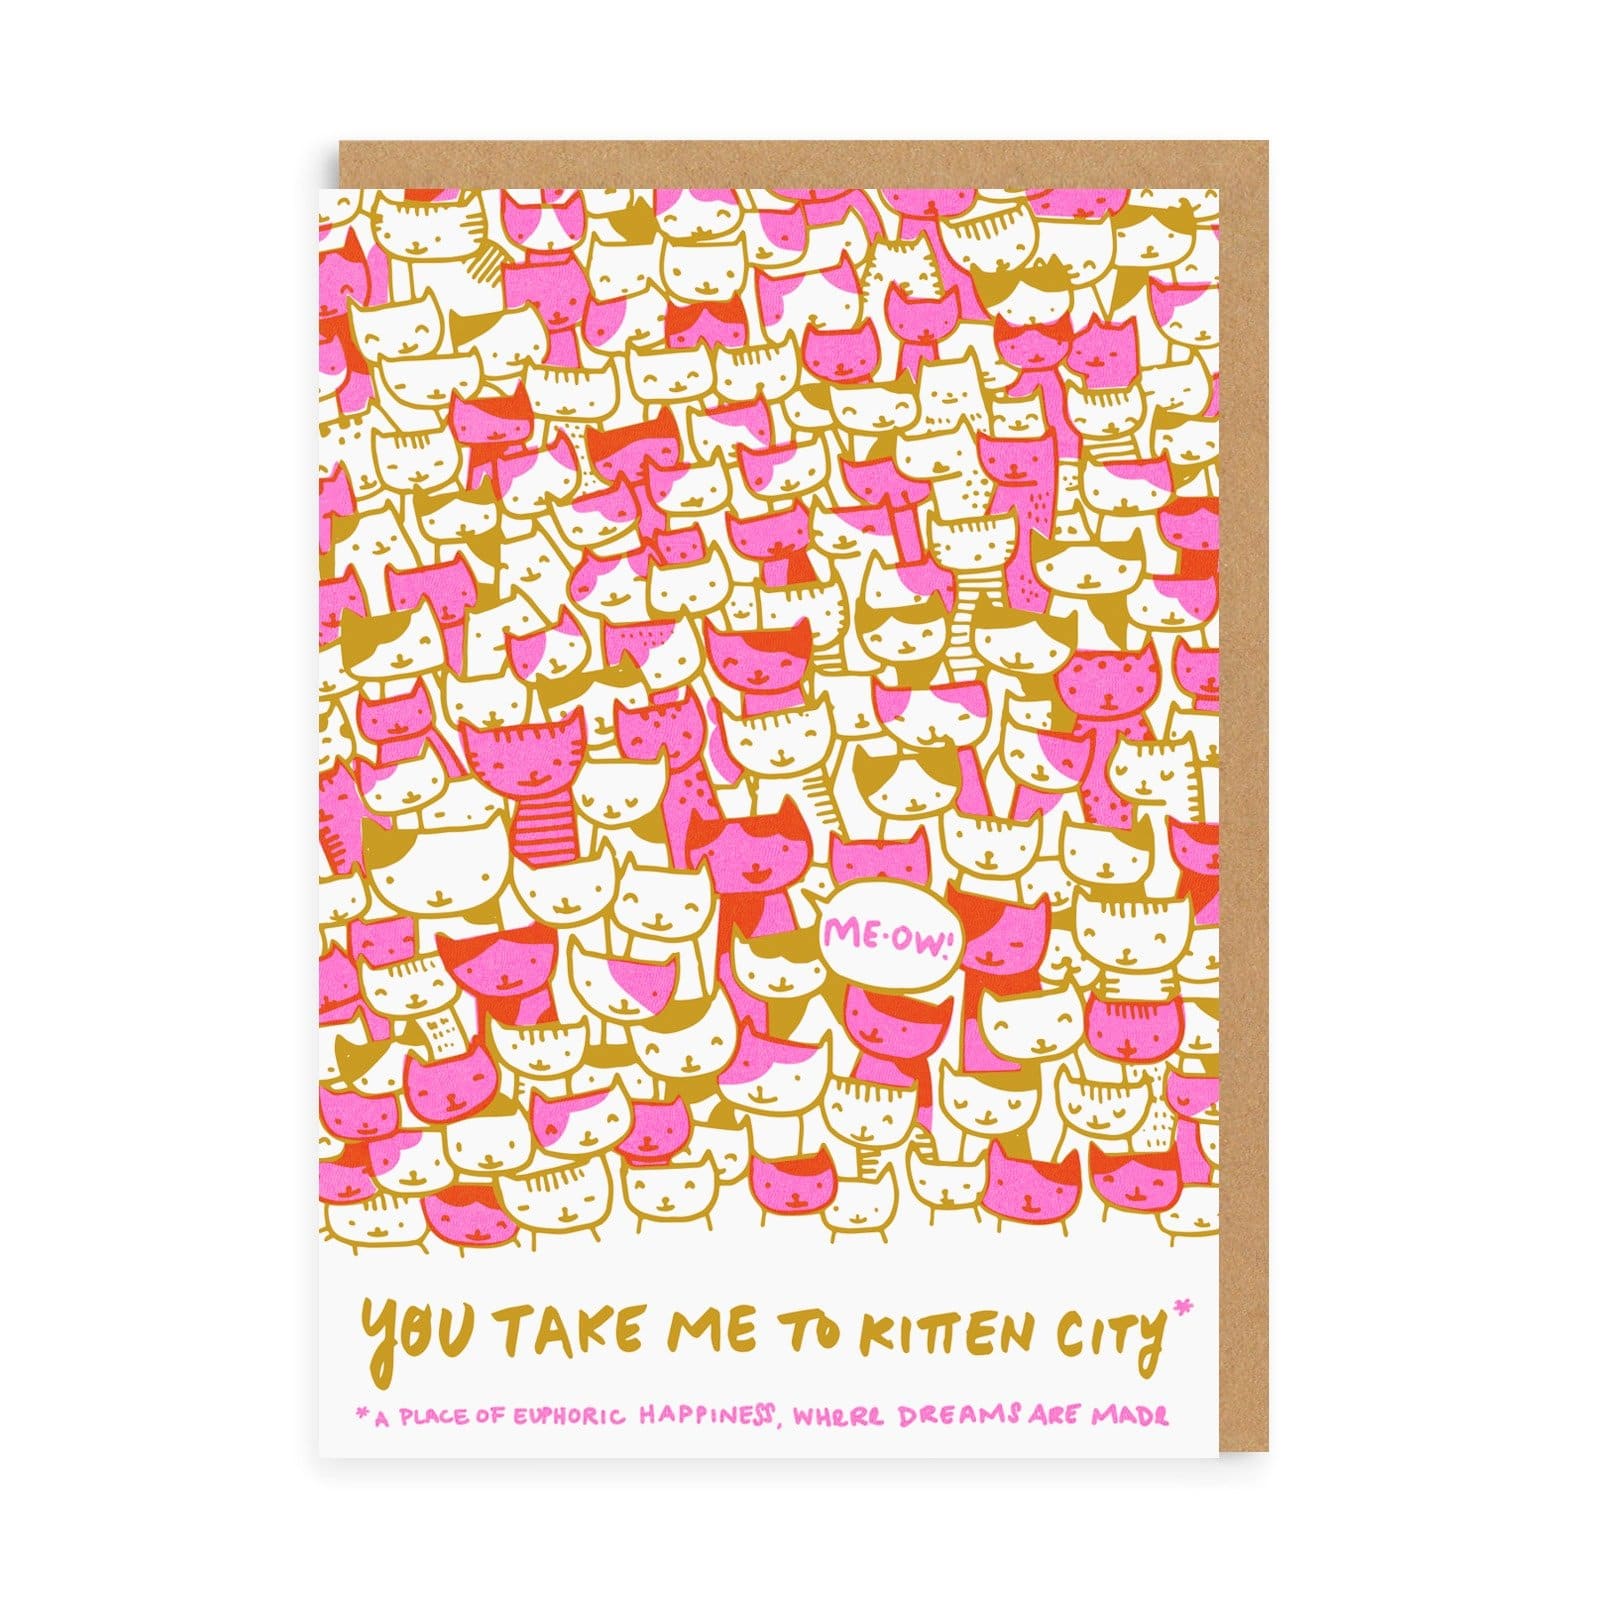 Valentine’s Day | Cute Valentines Card For Cat Lovers | Kitten City Greeting Card | Ohh Deer Unique Valentine’s Card for Him or Her | Artwork by Hello!Lucky | Made In The UK, Eco-Friendly Materials, Plastic Free Packaging